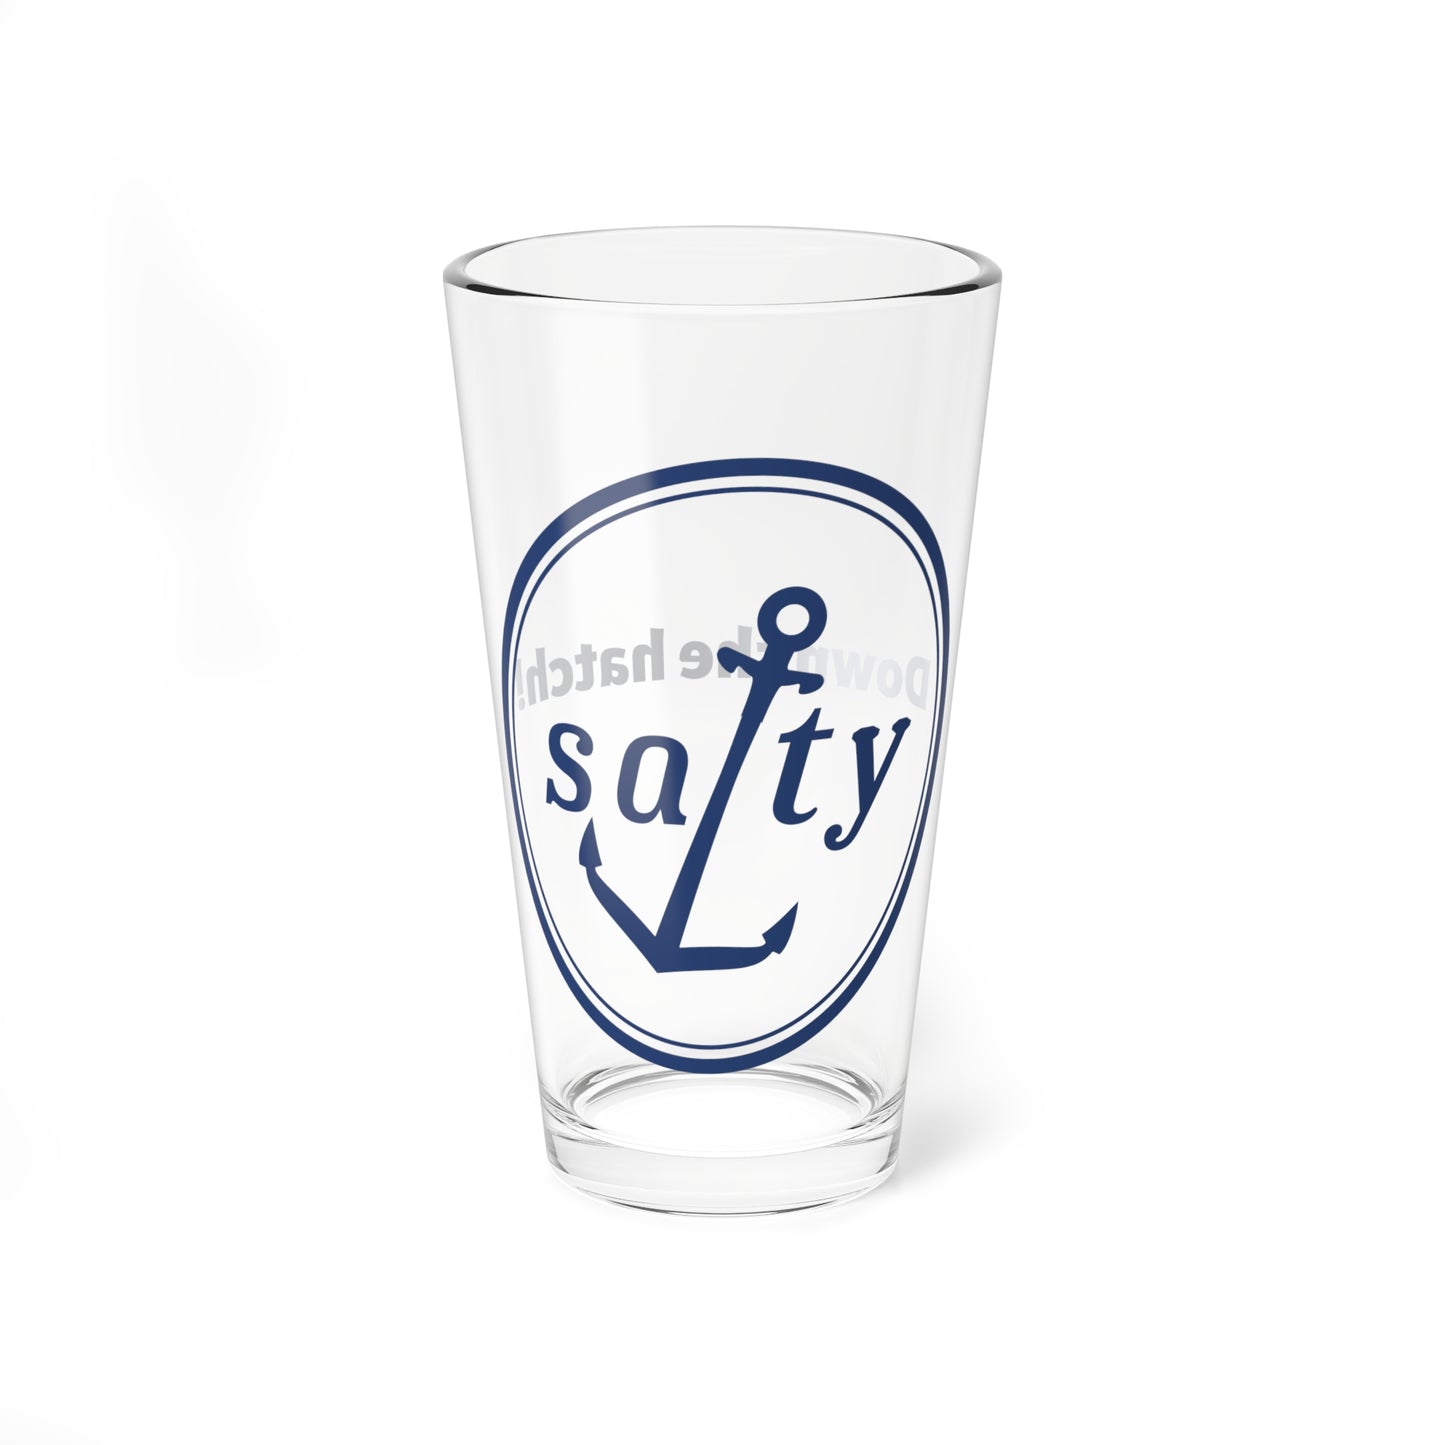 Salty™ Down the Hatch! Mixing/Drinking Glass, 16oz